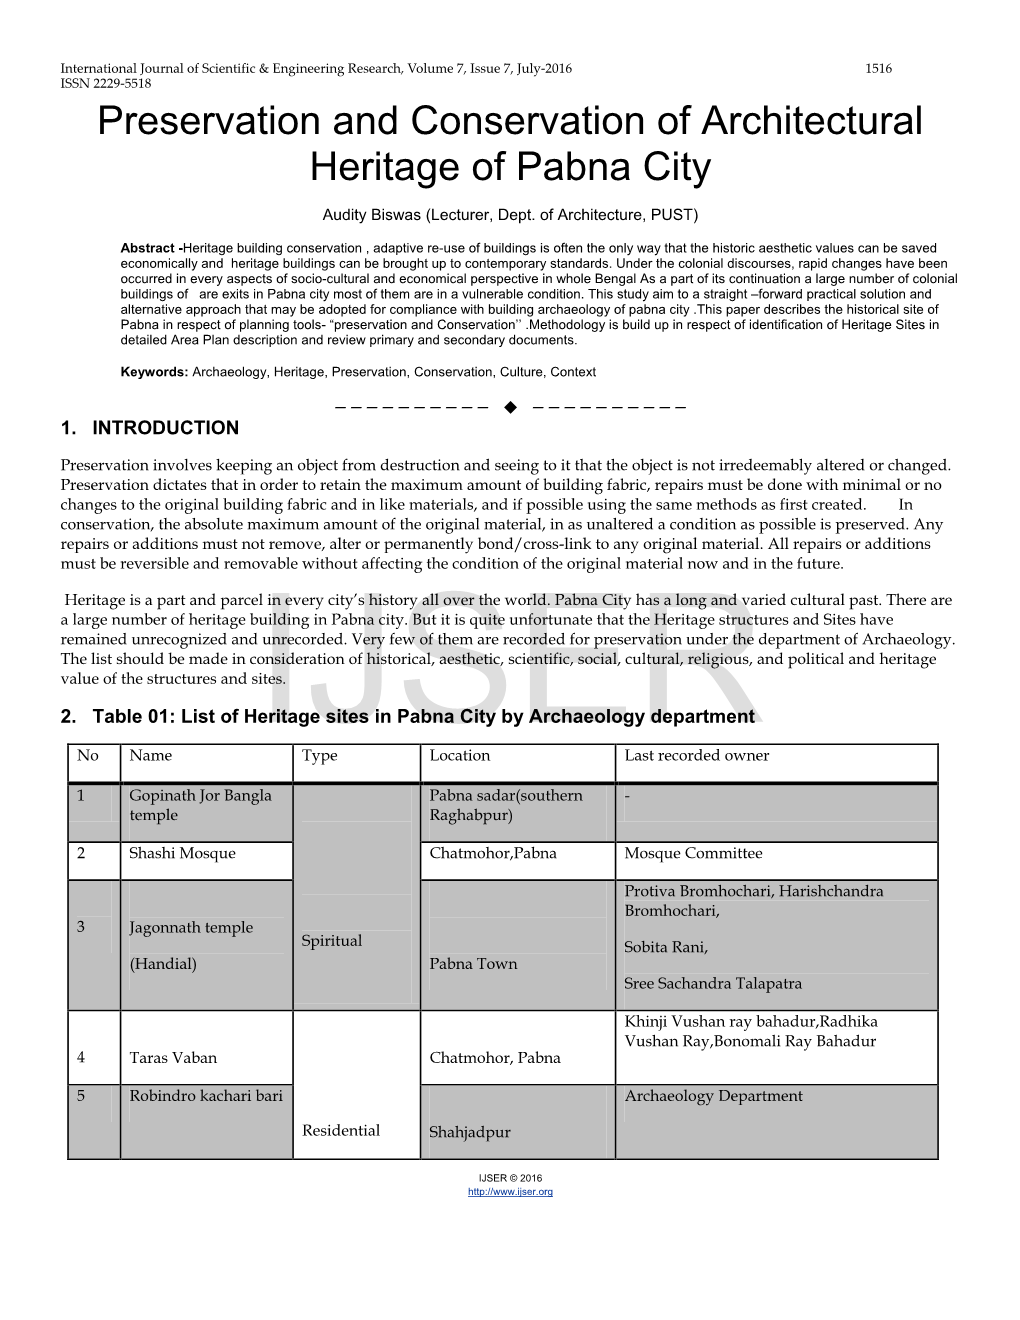 Preservation and Conservation of Architectural Heritage of Pabna City